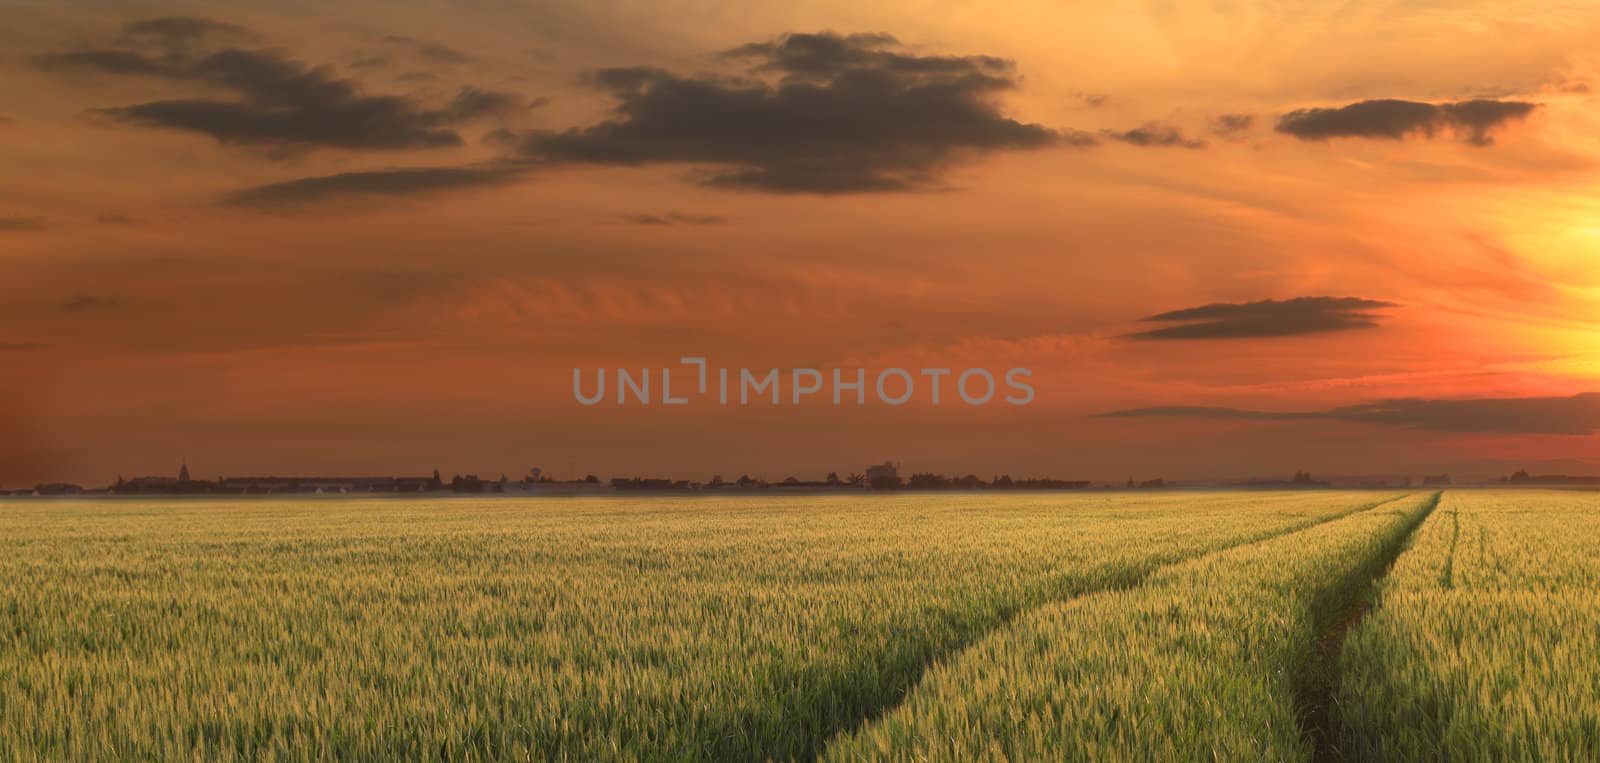 Colorful sunset over a field of cereals.